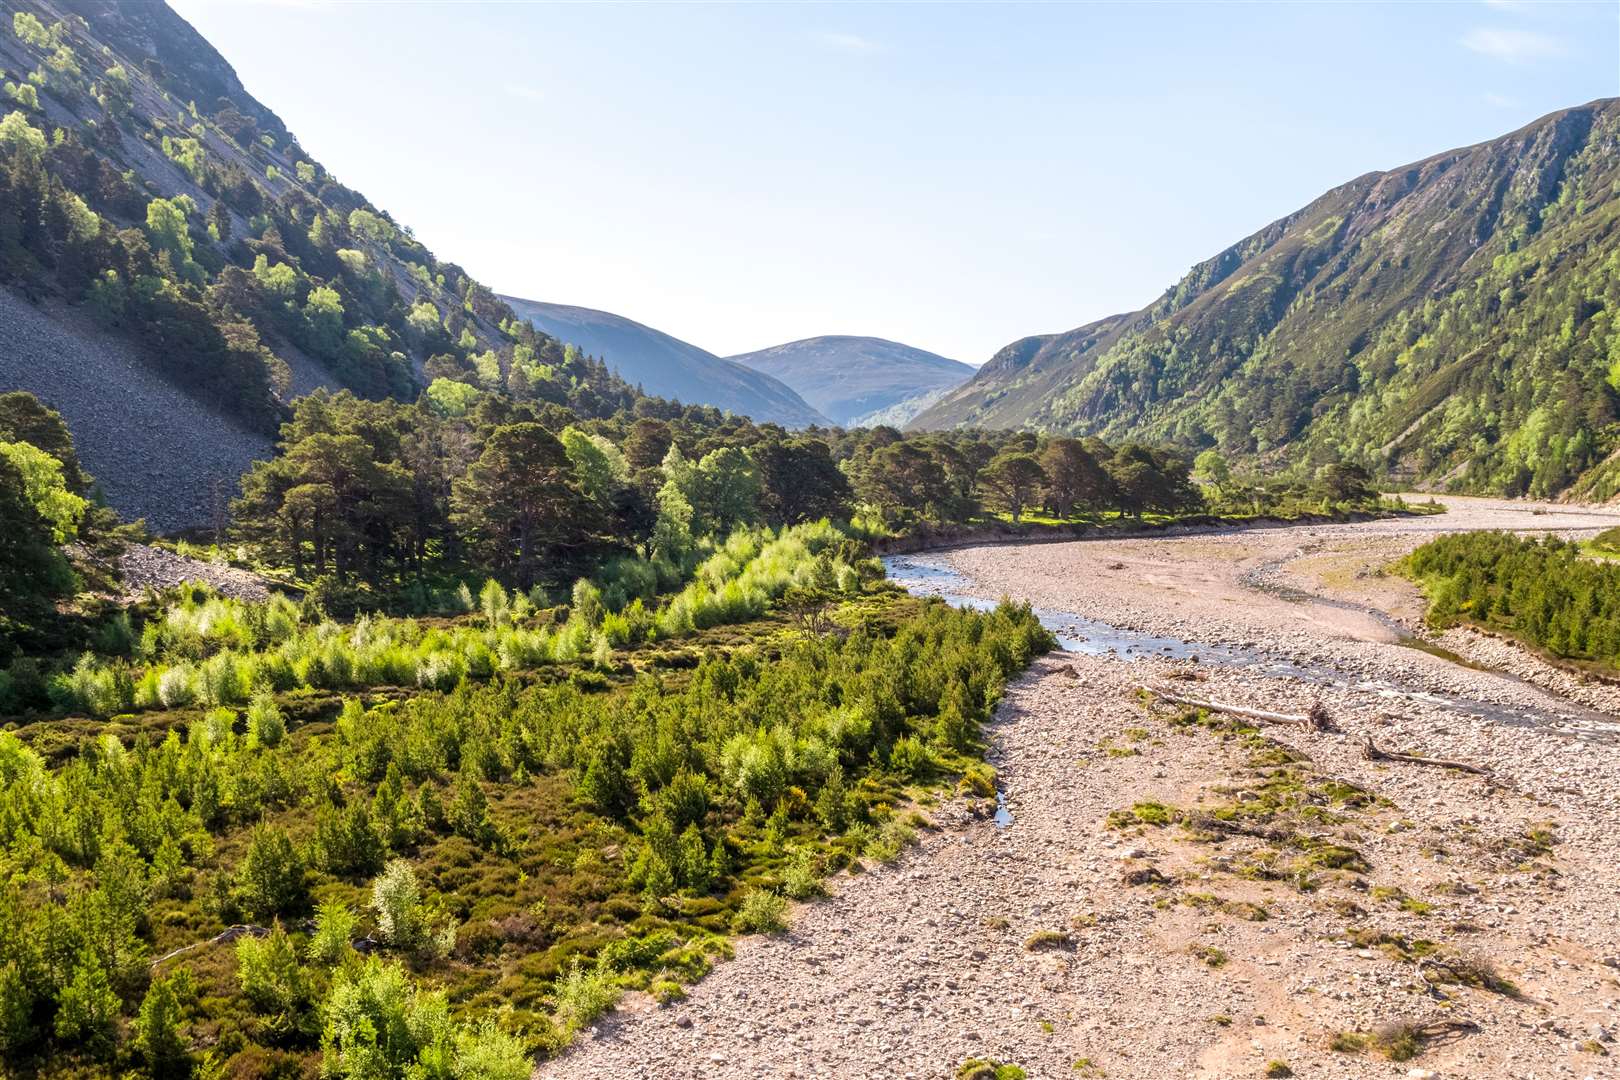 Rivers in the Cairngorms such as the Feshie, are increasingly benefitting from regenerating woodland along the banks, and fallen trees in the river channel, providing dappled shade and increased numbers of insects.